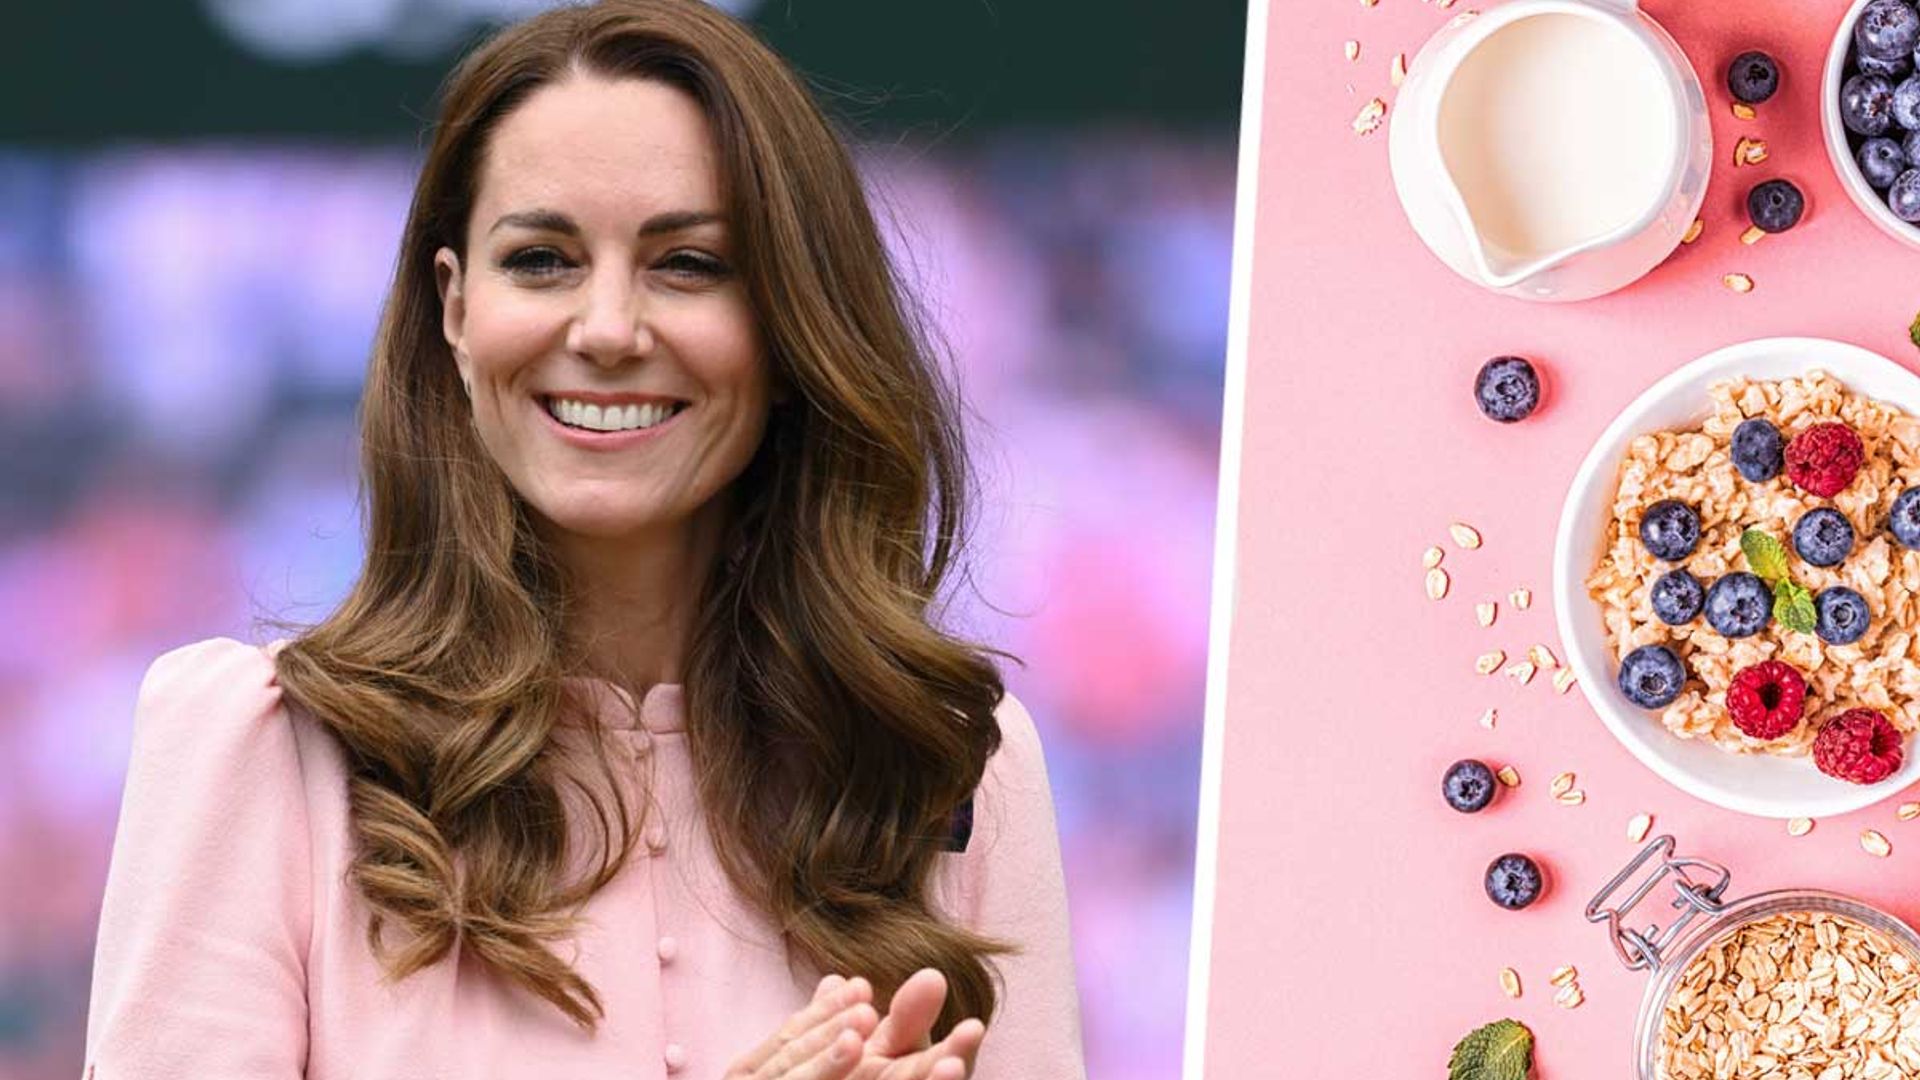 Get Kate Middleton's glow! Royal nutritionist reveals what to eat for radiant skin